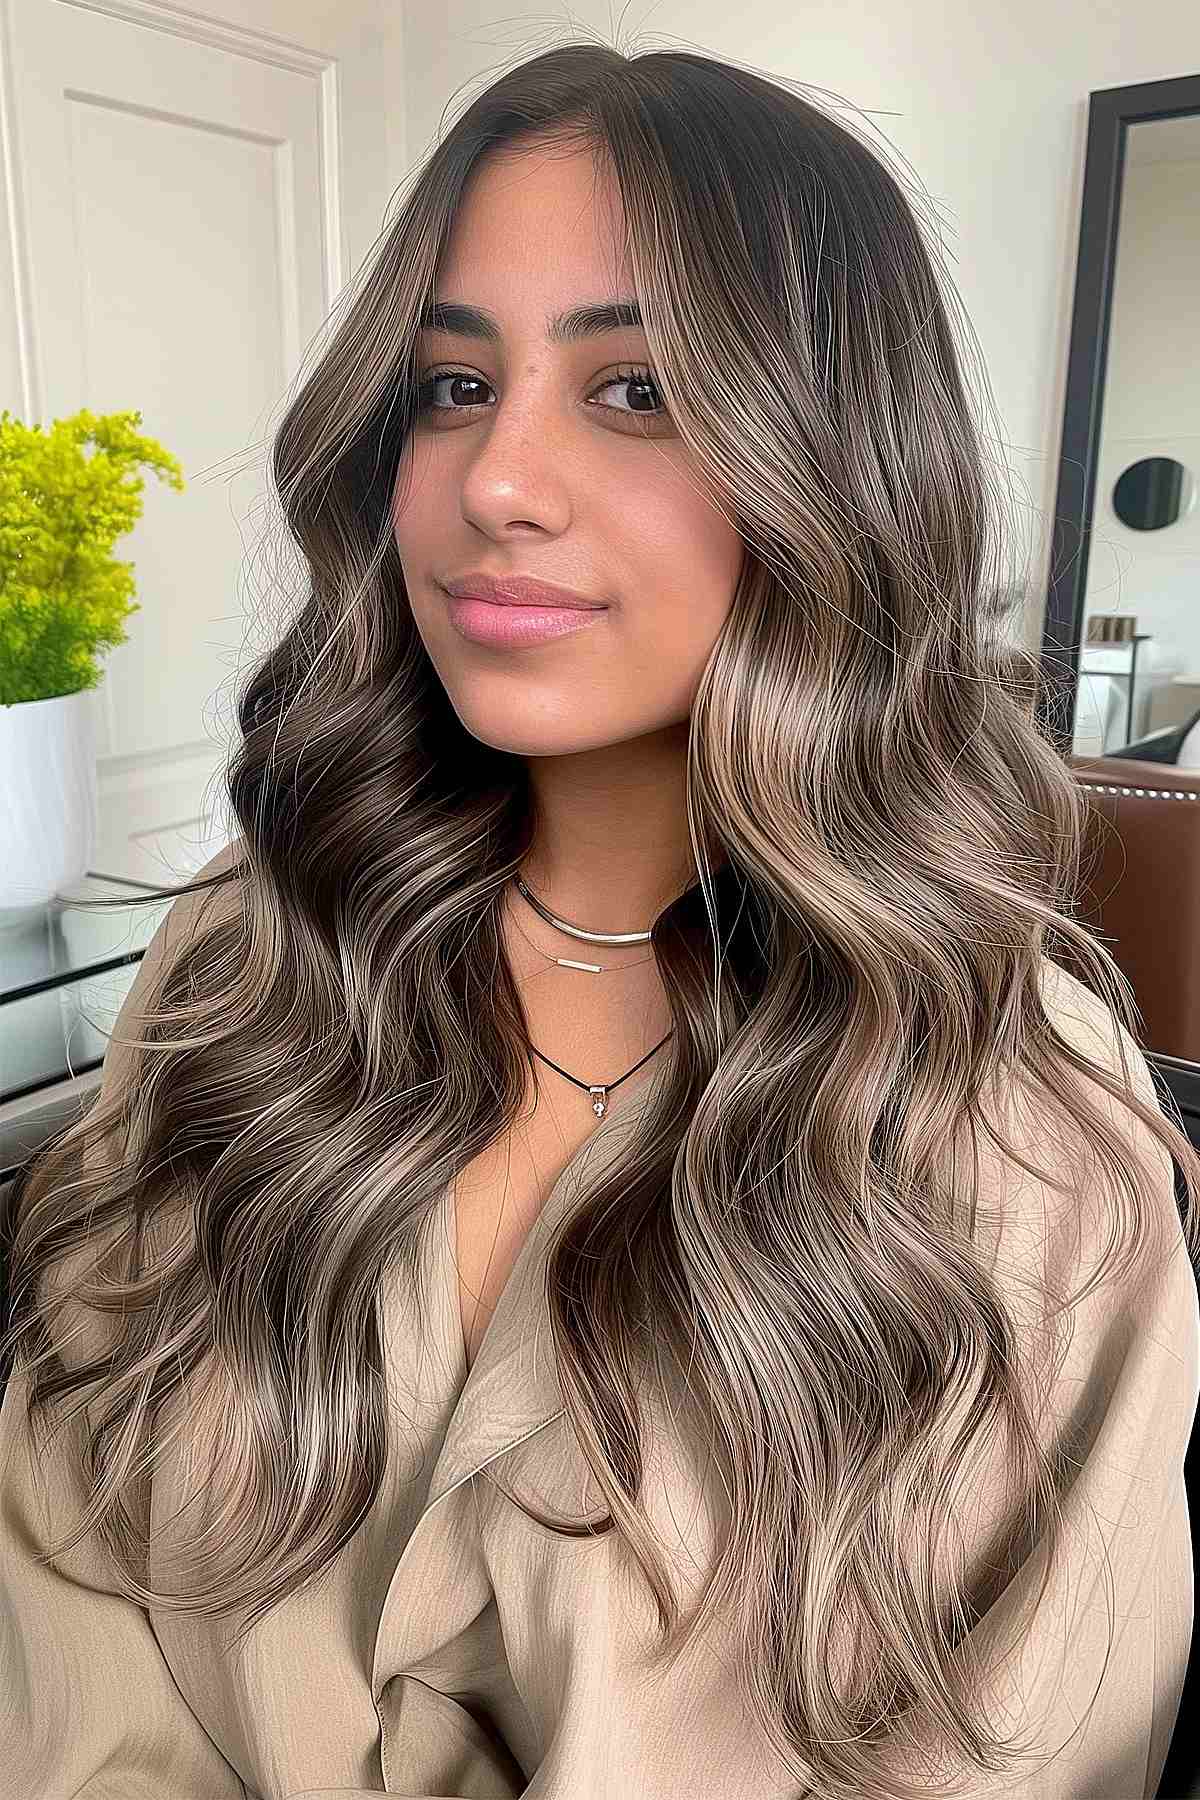 Long, wavy hair colored in a cool-toned icy mushroom brown, providing a chic and modern look while adding volume and texture.